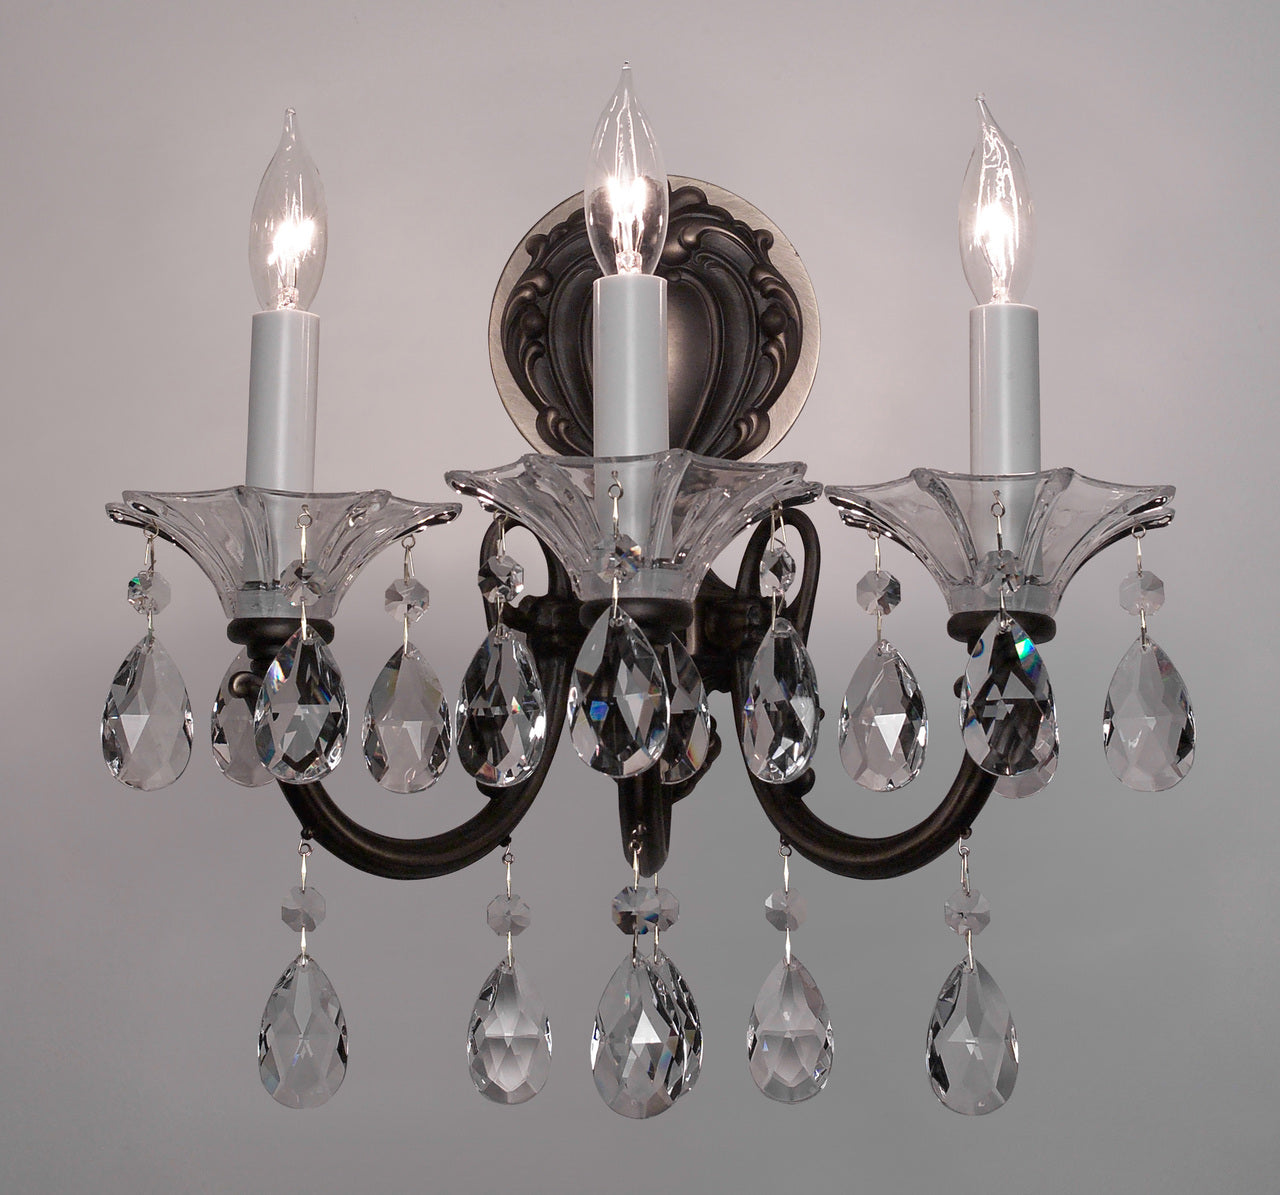 Classic Lighting 57053 SS CGT Via Lombardi Crystal Wall Sconce in Silverstone (Imported from Spain)